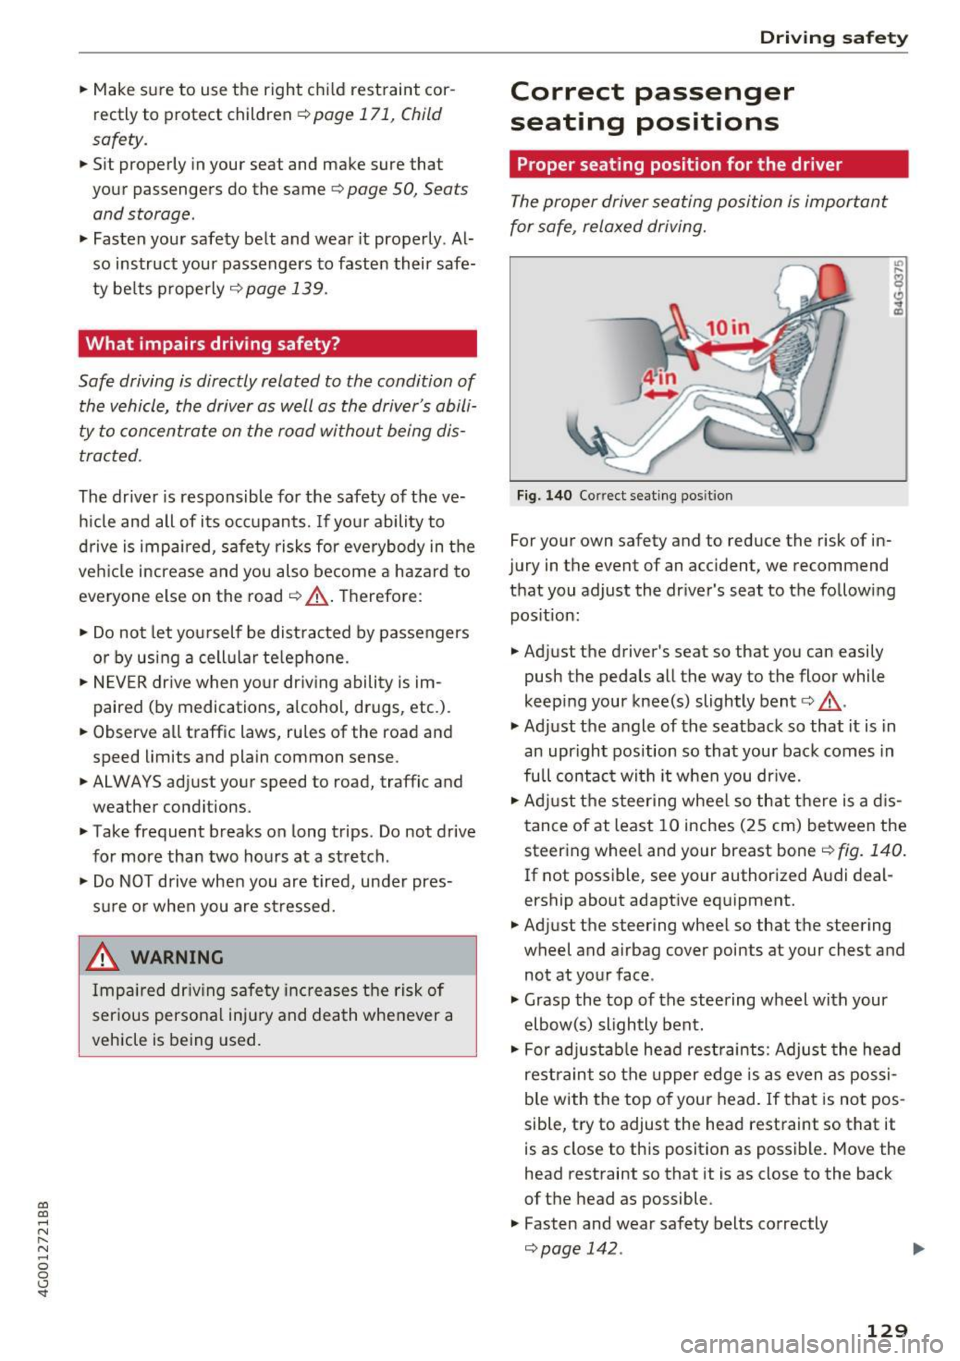 AUDI A6 2017  Owners Manual co 
co 
.... N 
" N .... 0 0 <.,;) SI" 
.. Make sure  to  use  the  right  chi ld  restraint  cor­
rectly  to  protect  children 
~ page  171 , Child 
safety  . 
..  Sit  properly  in your  seat  an